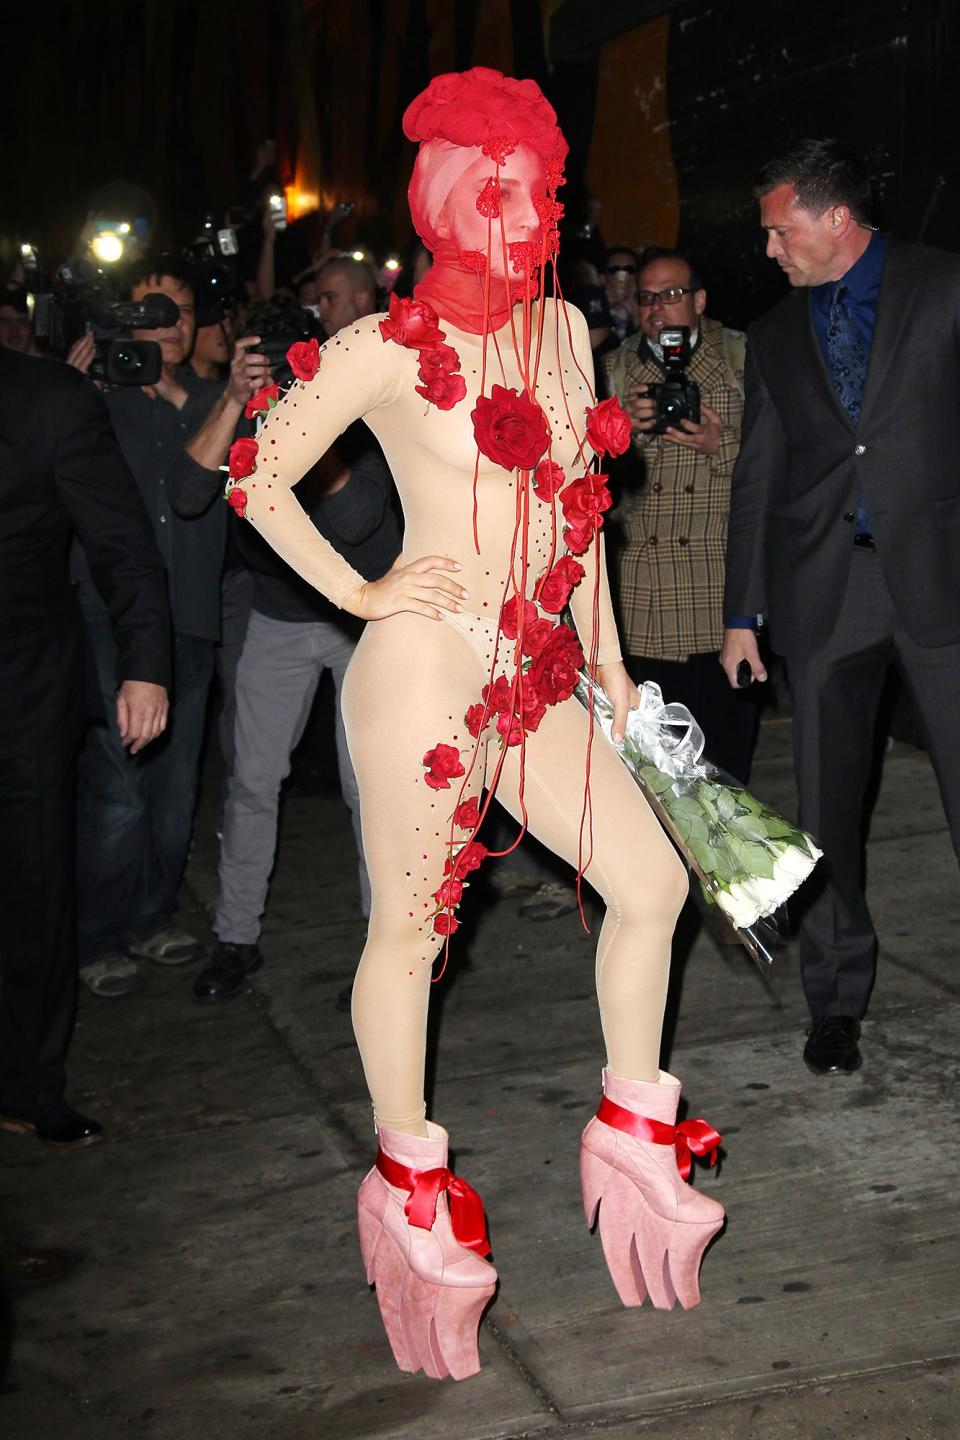 Queen of the death defying heel, no one does footwear quite like Gaga.